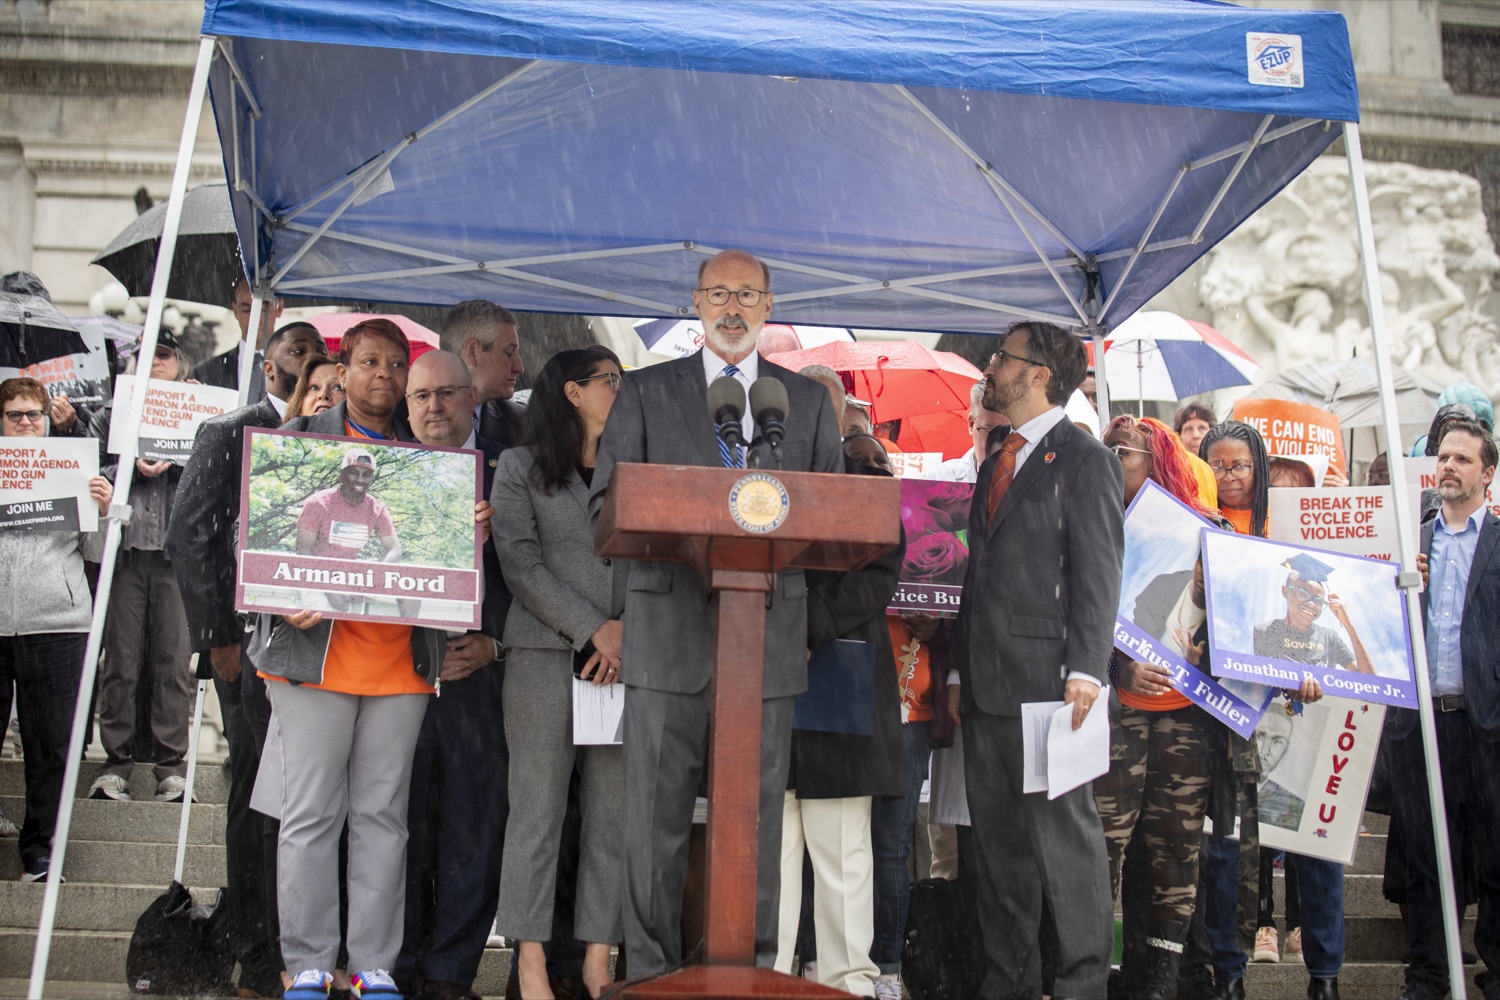 Governor Tom Wolf, joined by CeaseFirePA and more than 200 Pennsylvanians at the Capitol, calls for legislative action to save lives against gun violence, in Harrisburg, PA on April 26, 2022.<br><a href="https://filesource.amperwave.net/commonwealthofpa/photo/20782_gov_ceaseFirePA_14.JPG" target="_blank">⇣ Download Photo</a>